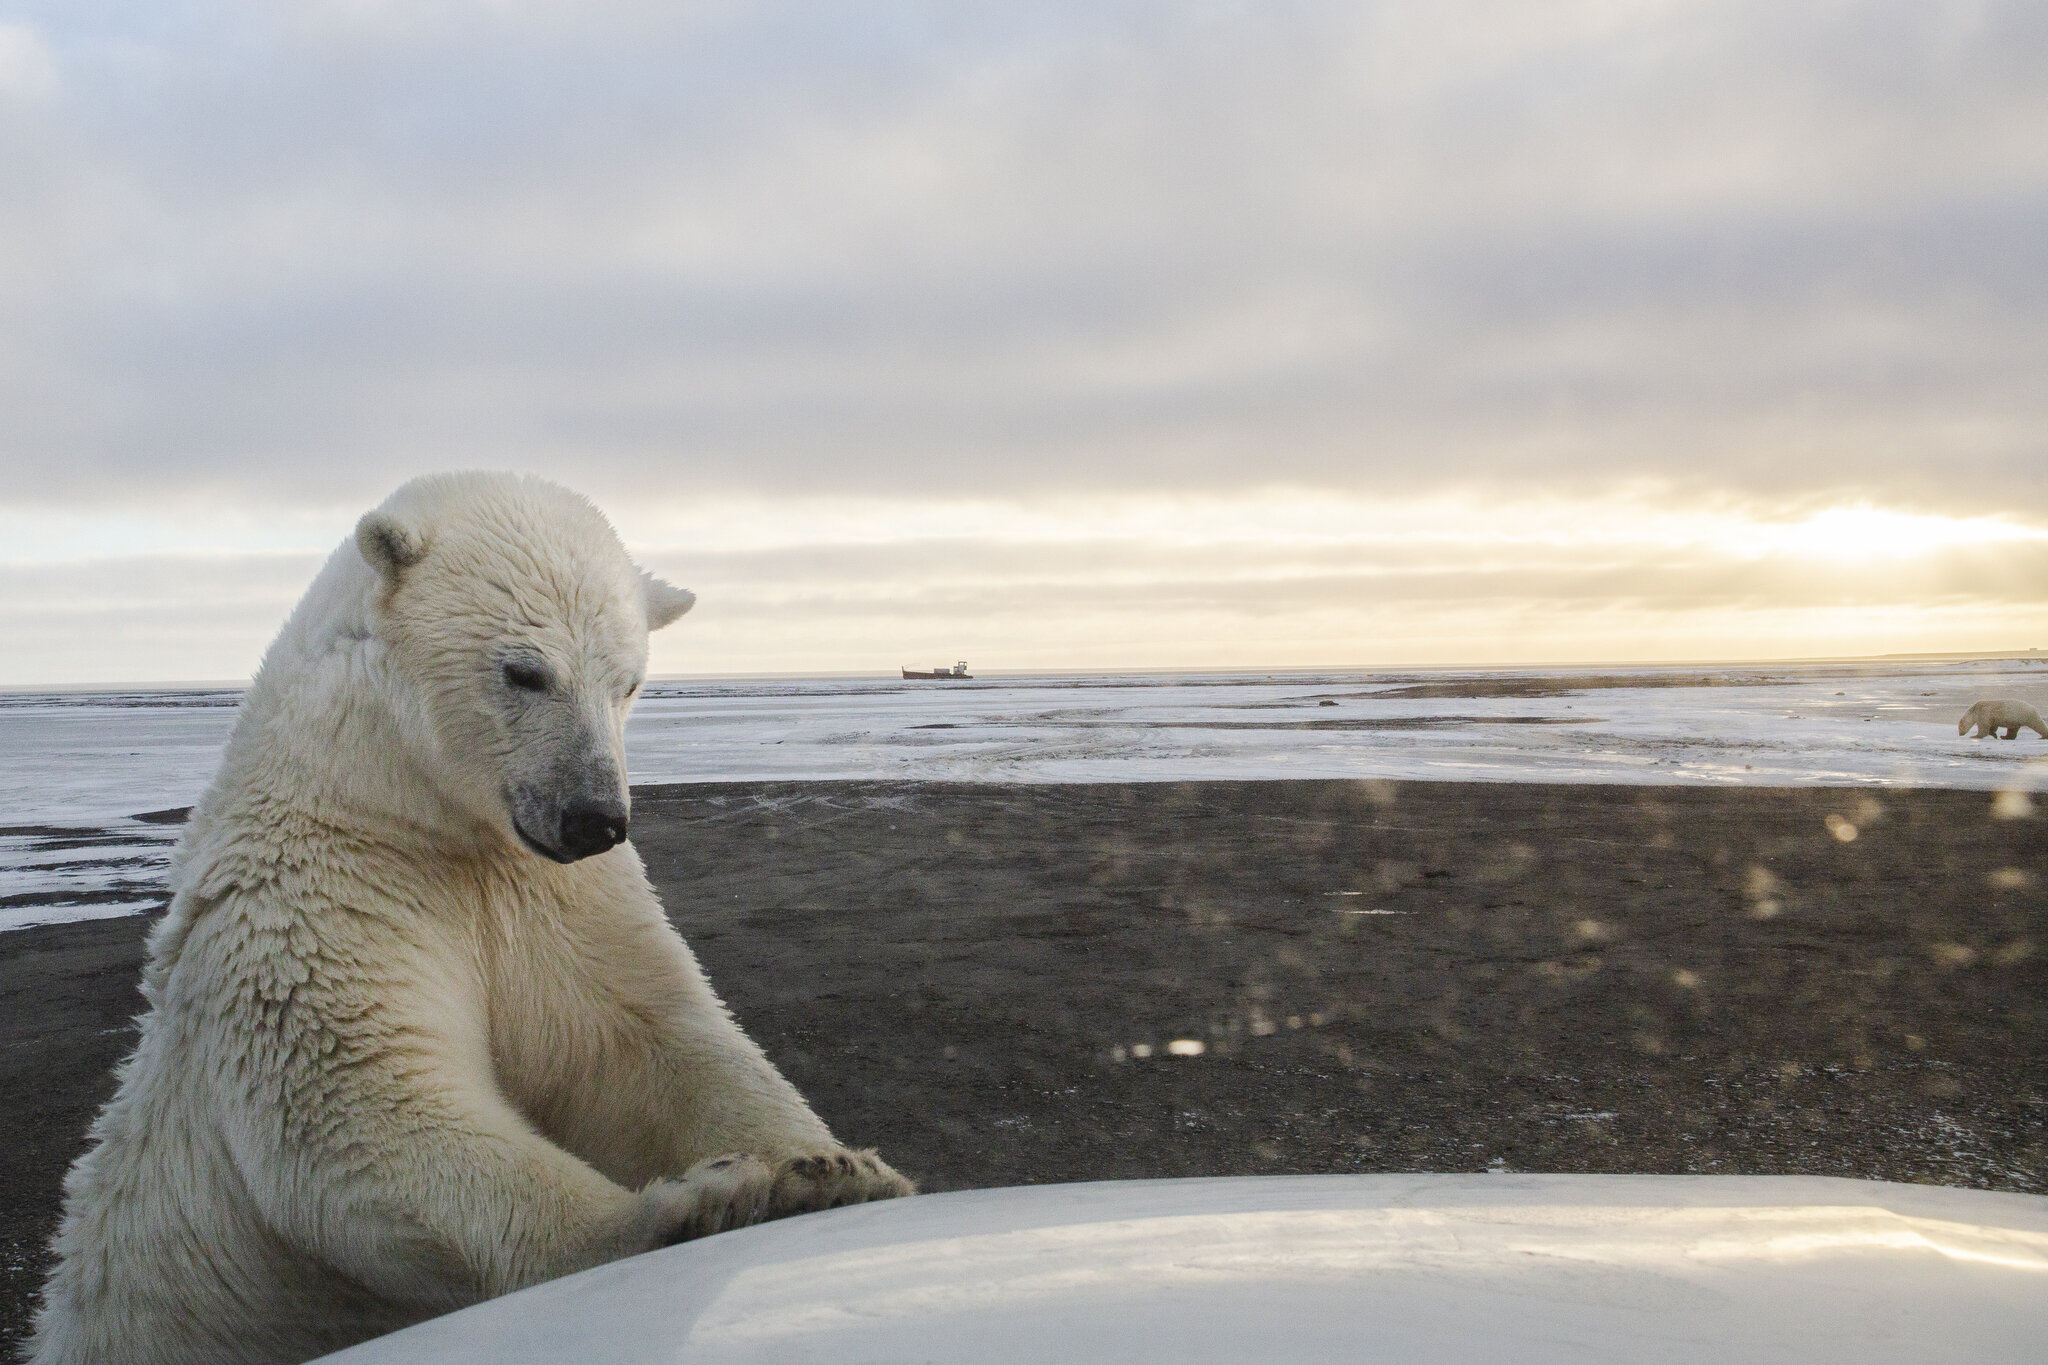  A curious teenage male polar bear investigates the hood of a truck in Kaktovik, Alaska, an Inupiat native village in the Alaskan Arctic. October 17th, 2015. Every fall after the Kaktovik community’s annual subsistence hunt of bowhead whales, more an